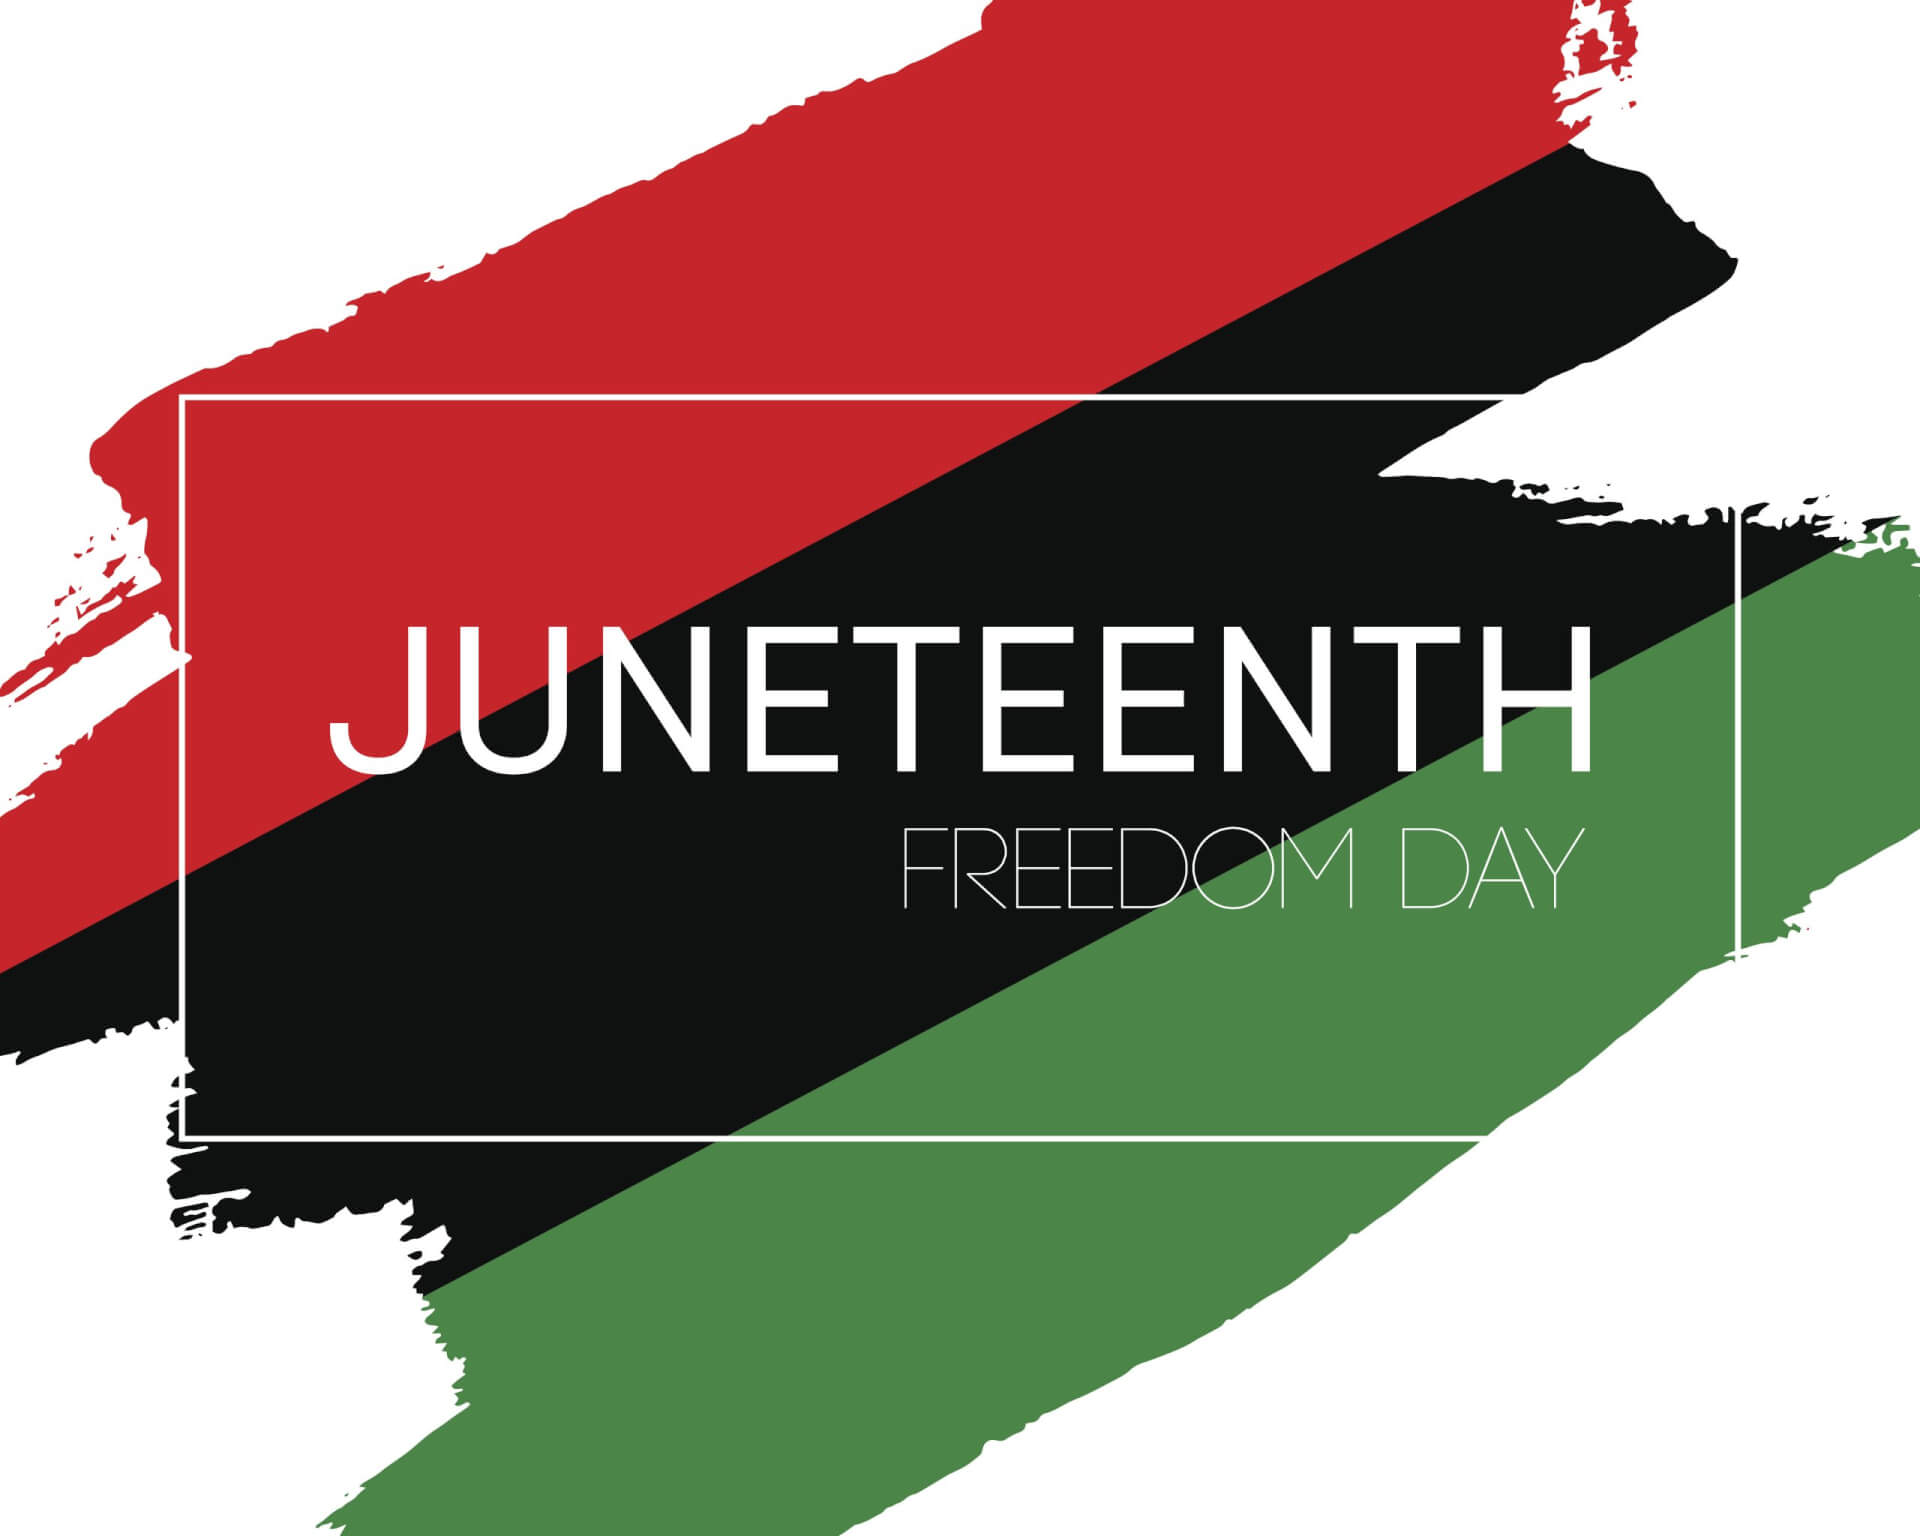 Image for Juneteenth: College Closed June 20 